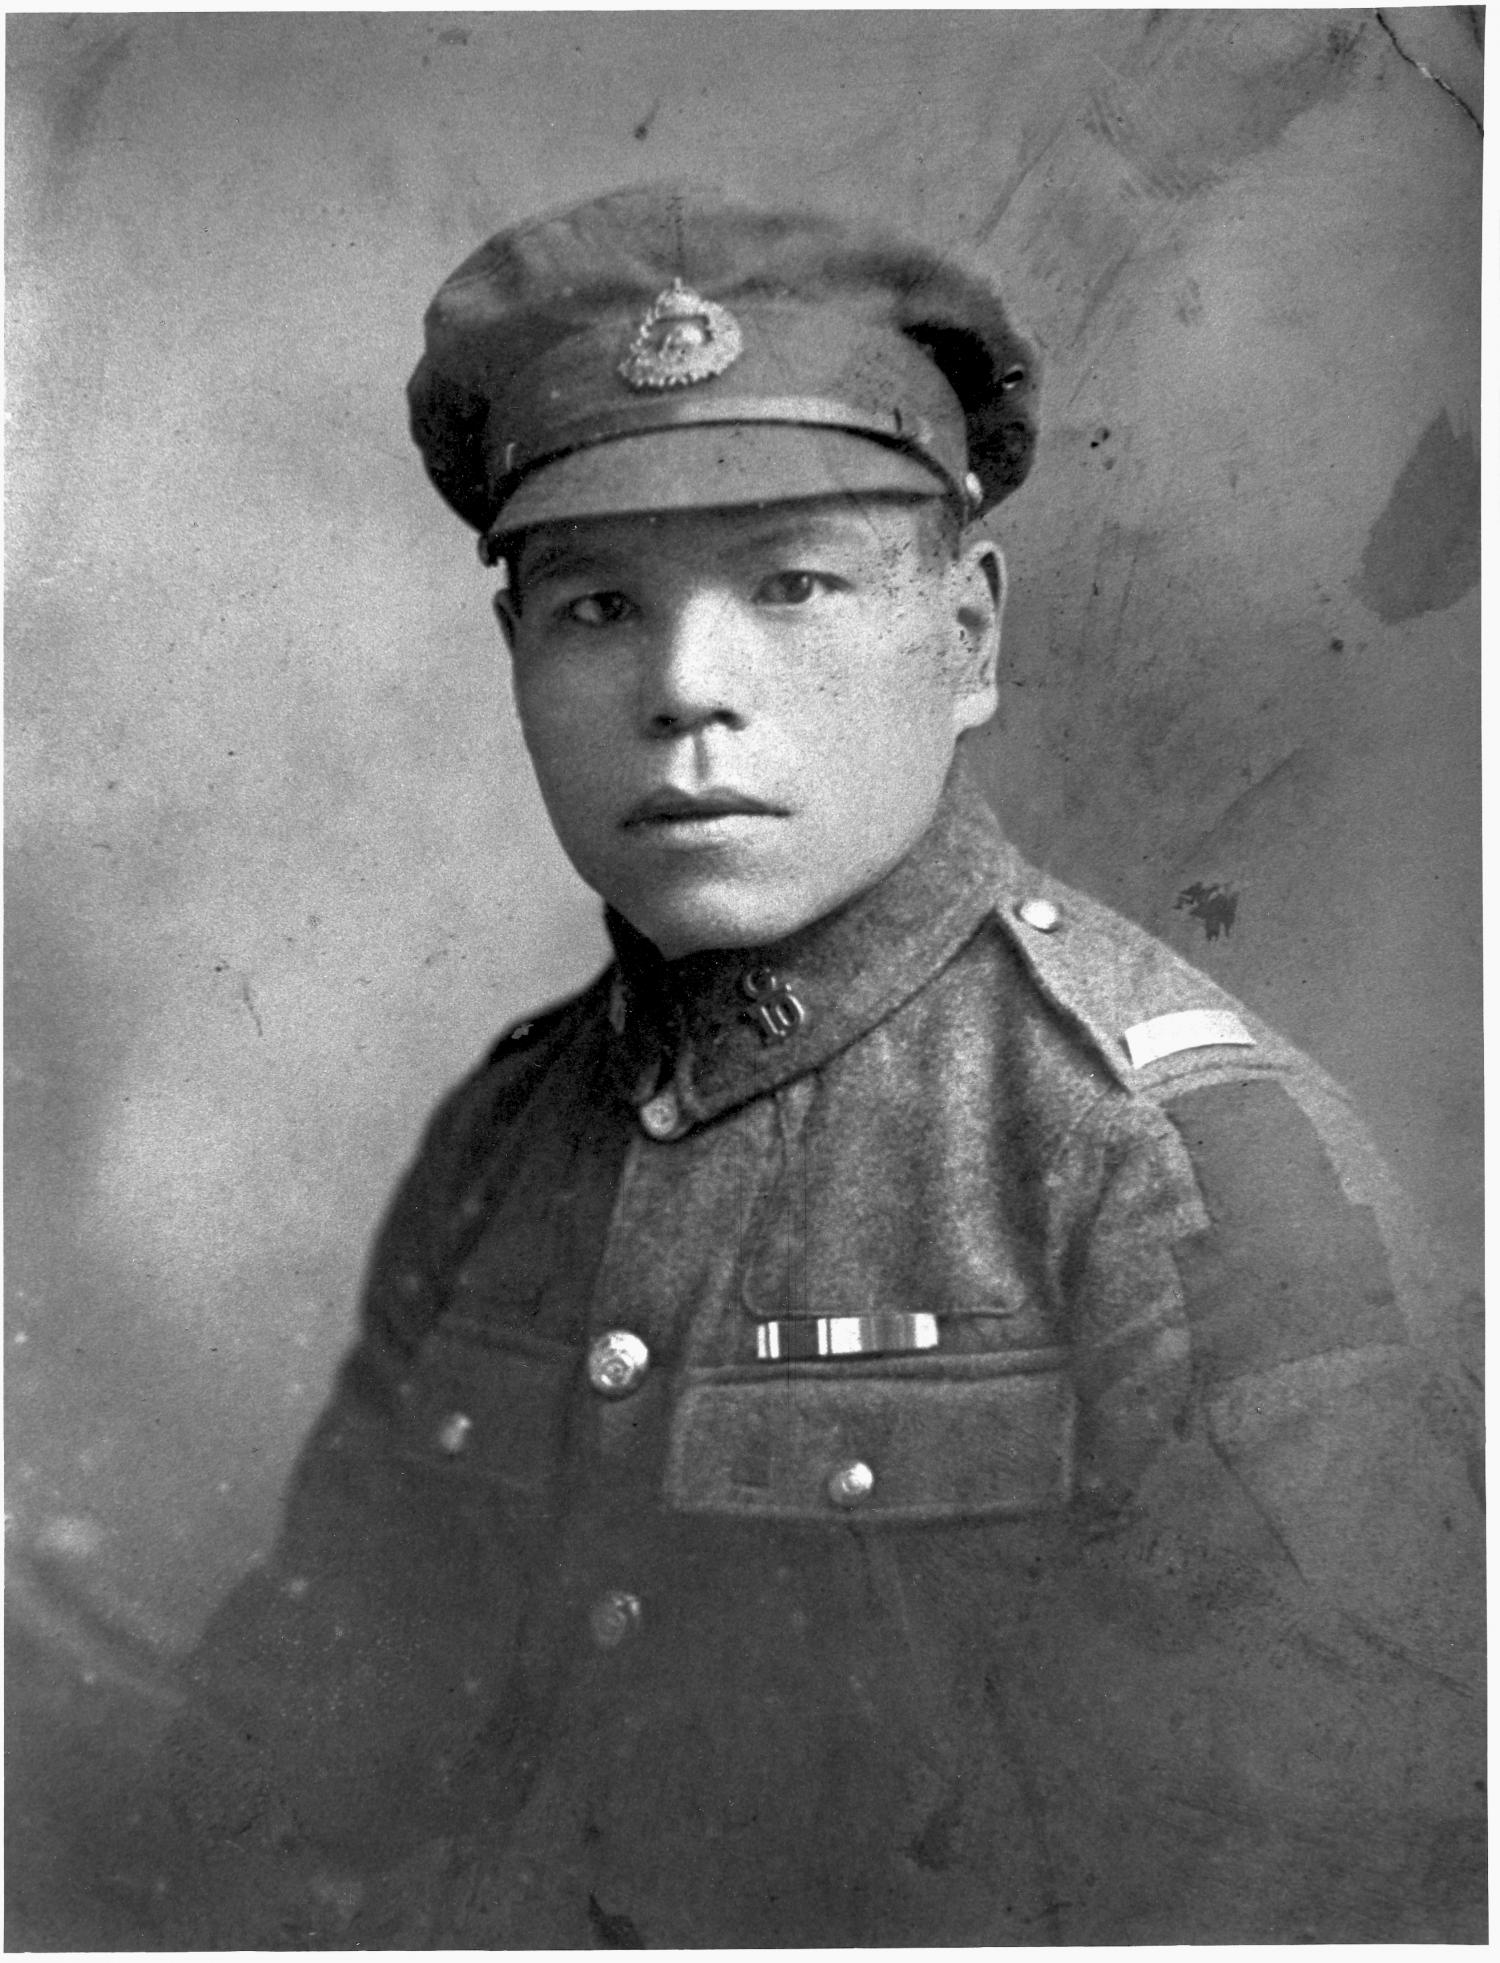 Portrait of Tsunekichi Kitagawa, a Japanese-Canadian soldier from the First World War.